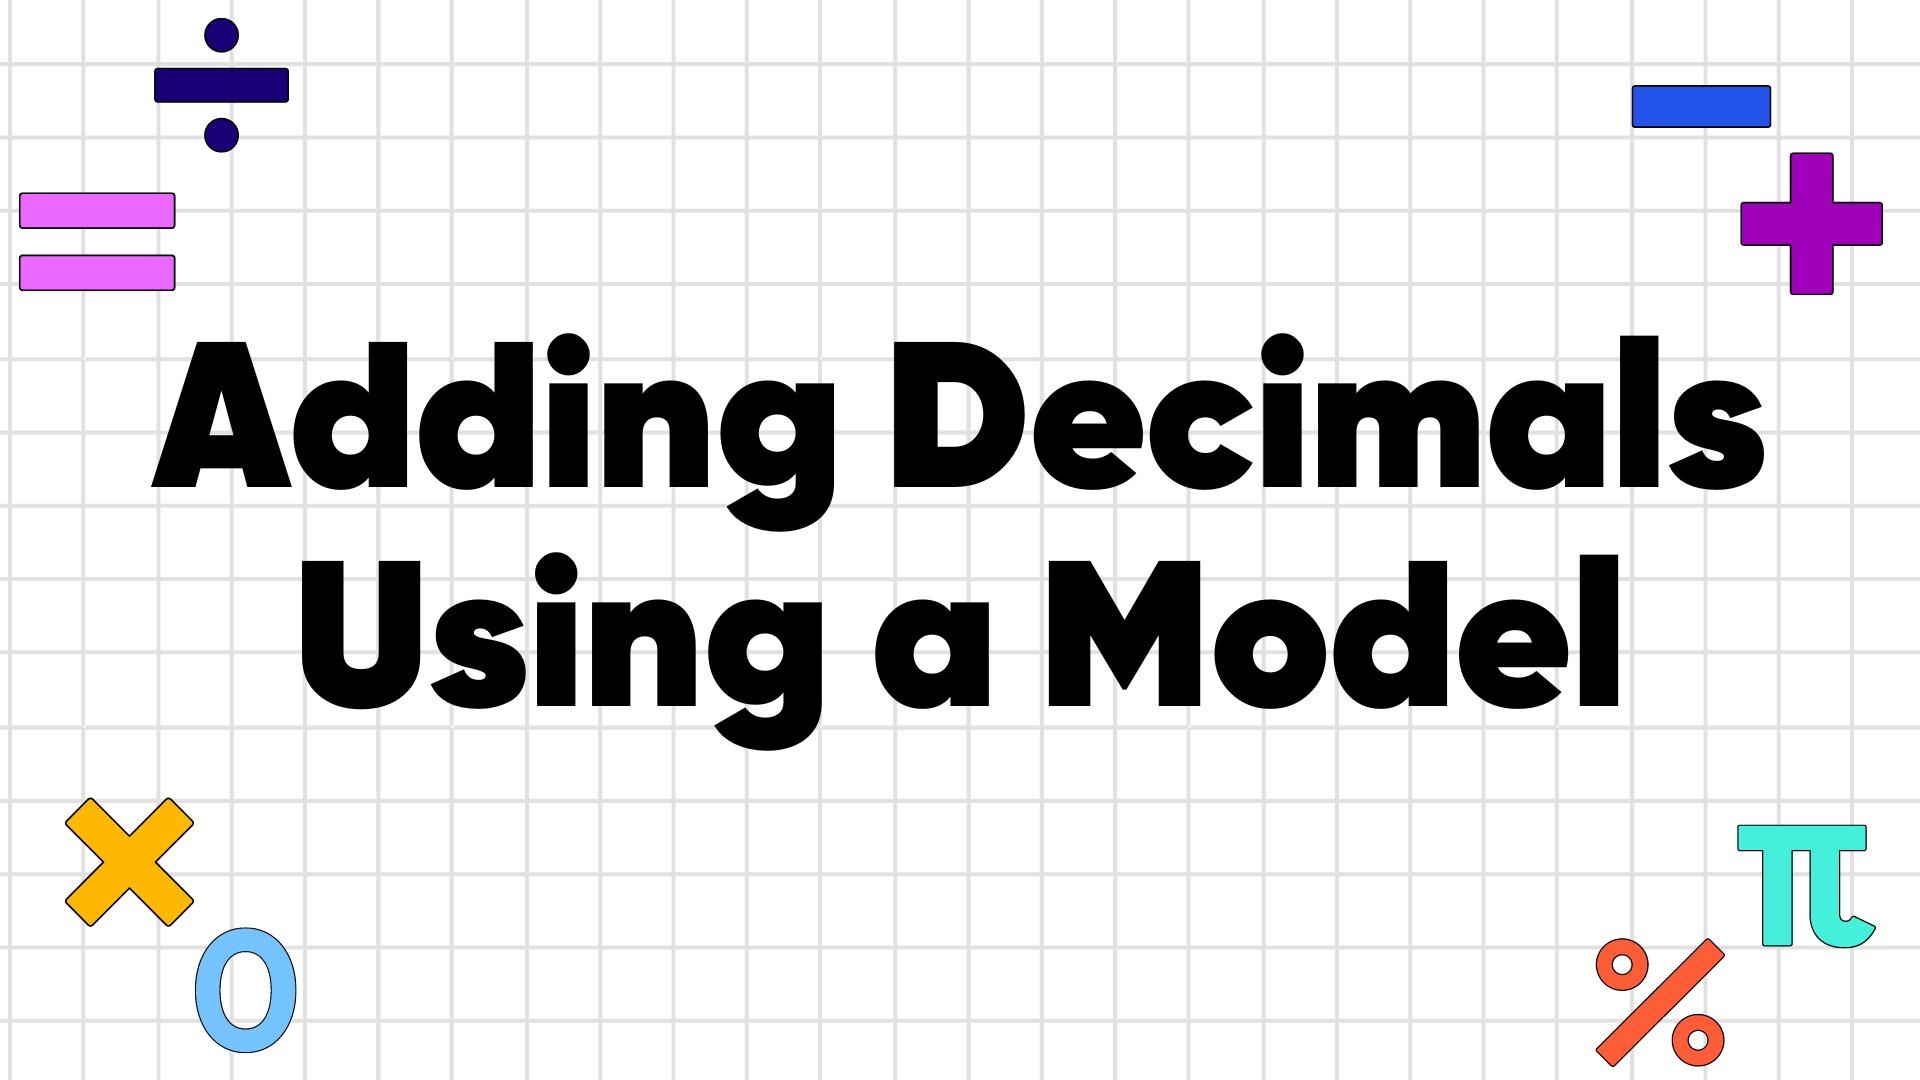 How To Add Decimals Using a Model